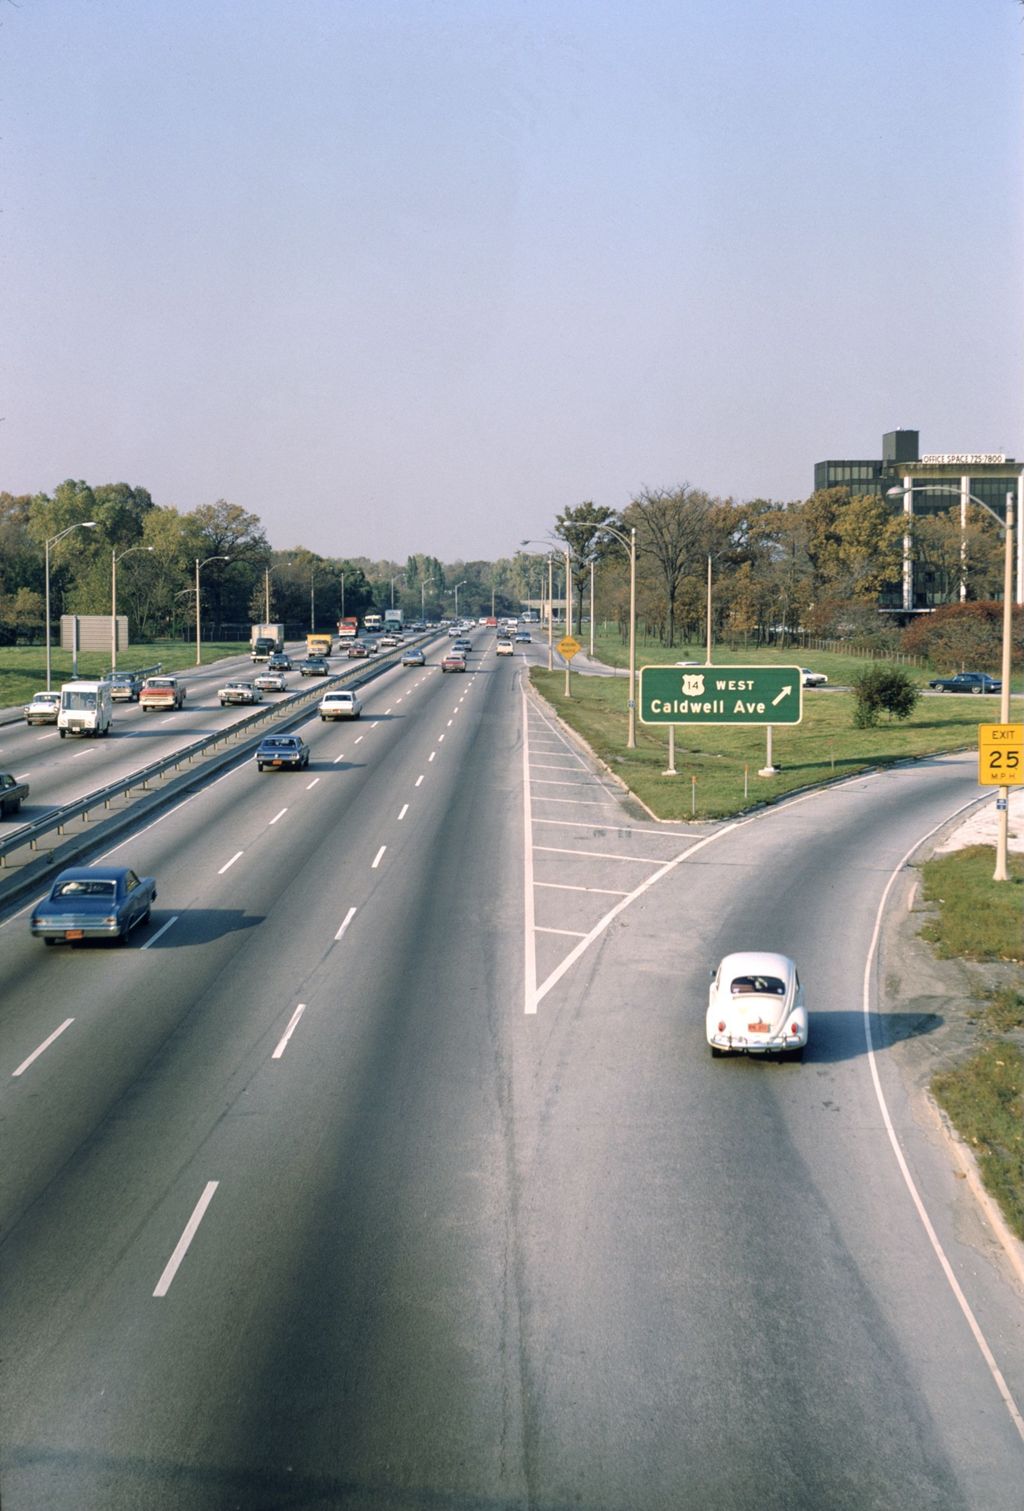 Miniature of Edens Expressway at Peterson Avenue